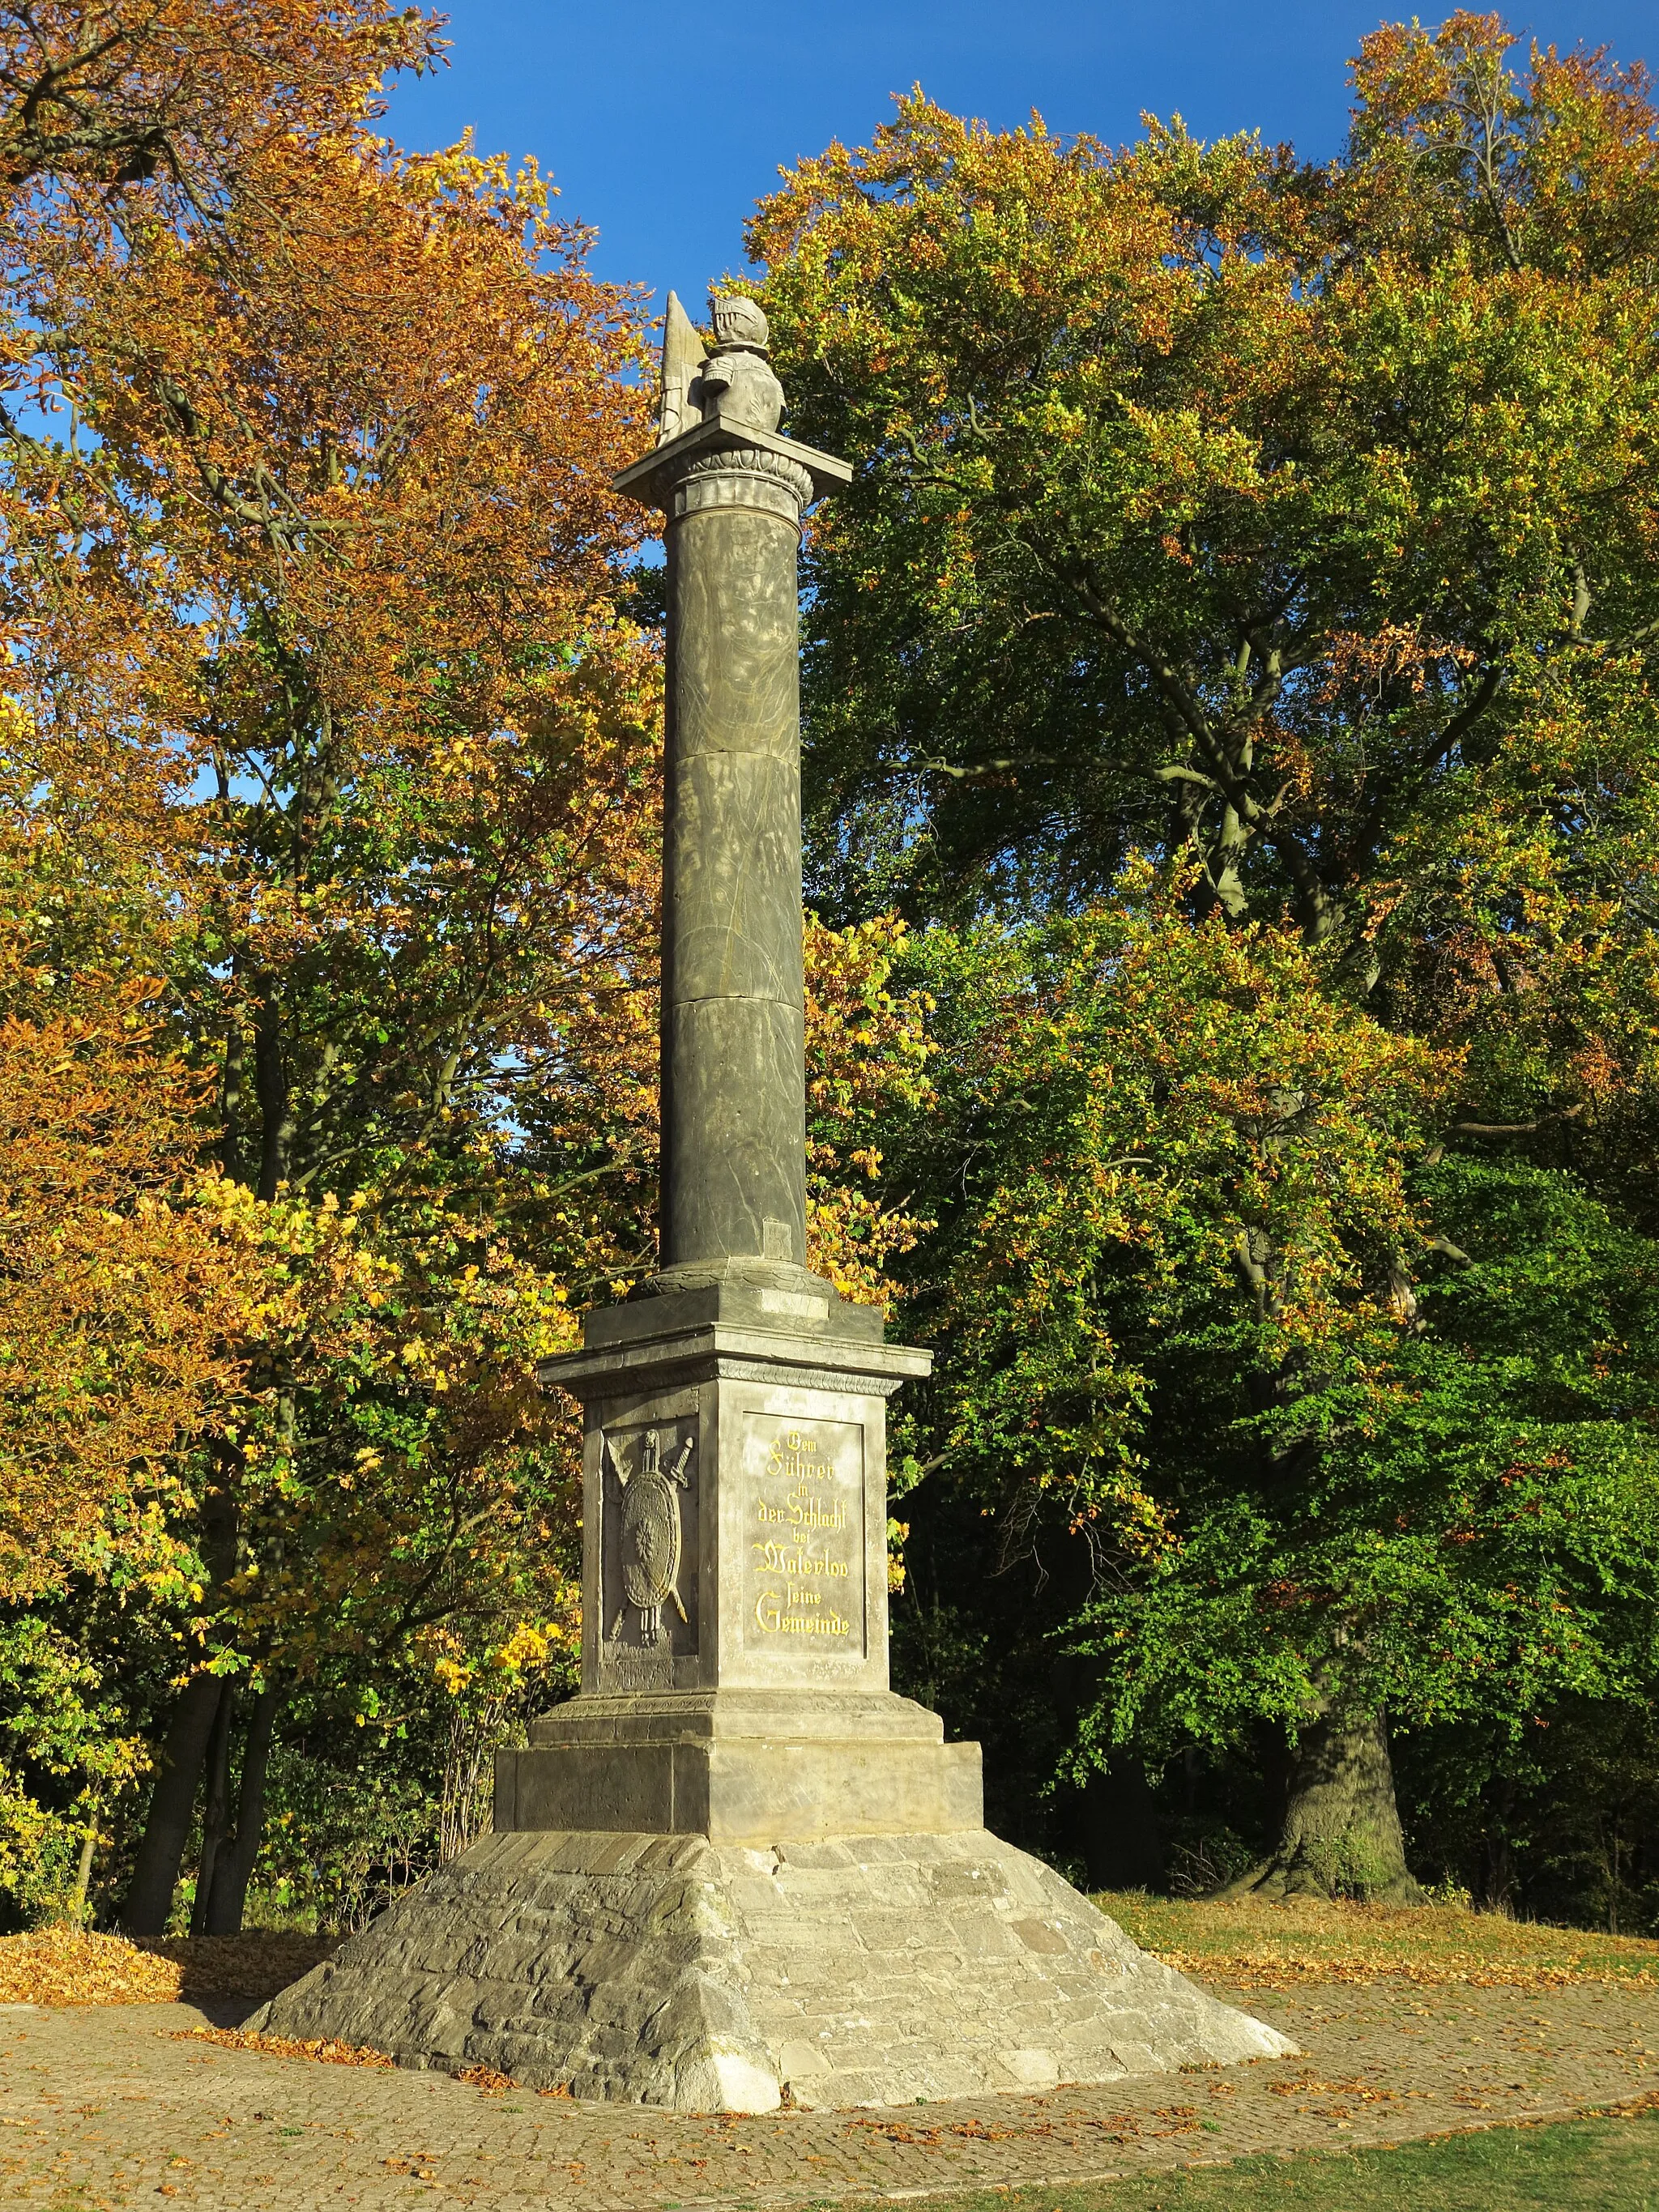 Photo showing: Brunswick, Germany: the monument to Johann Elias Olfermann, an army officer from Brunswick who had led the troops of Brunswick during the Battle of Waterloo, inaugurated on the tenth anniversary of his death 18 October 1832